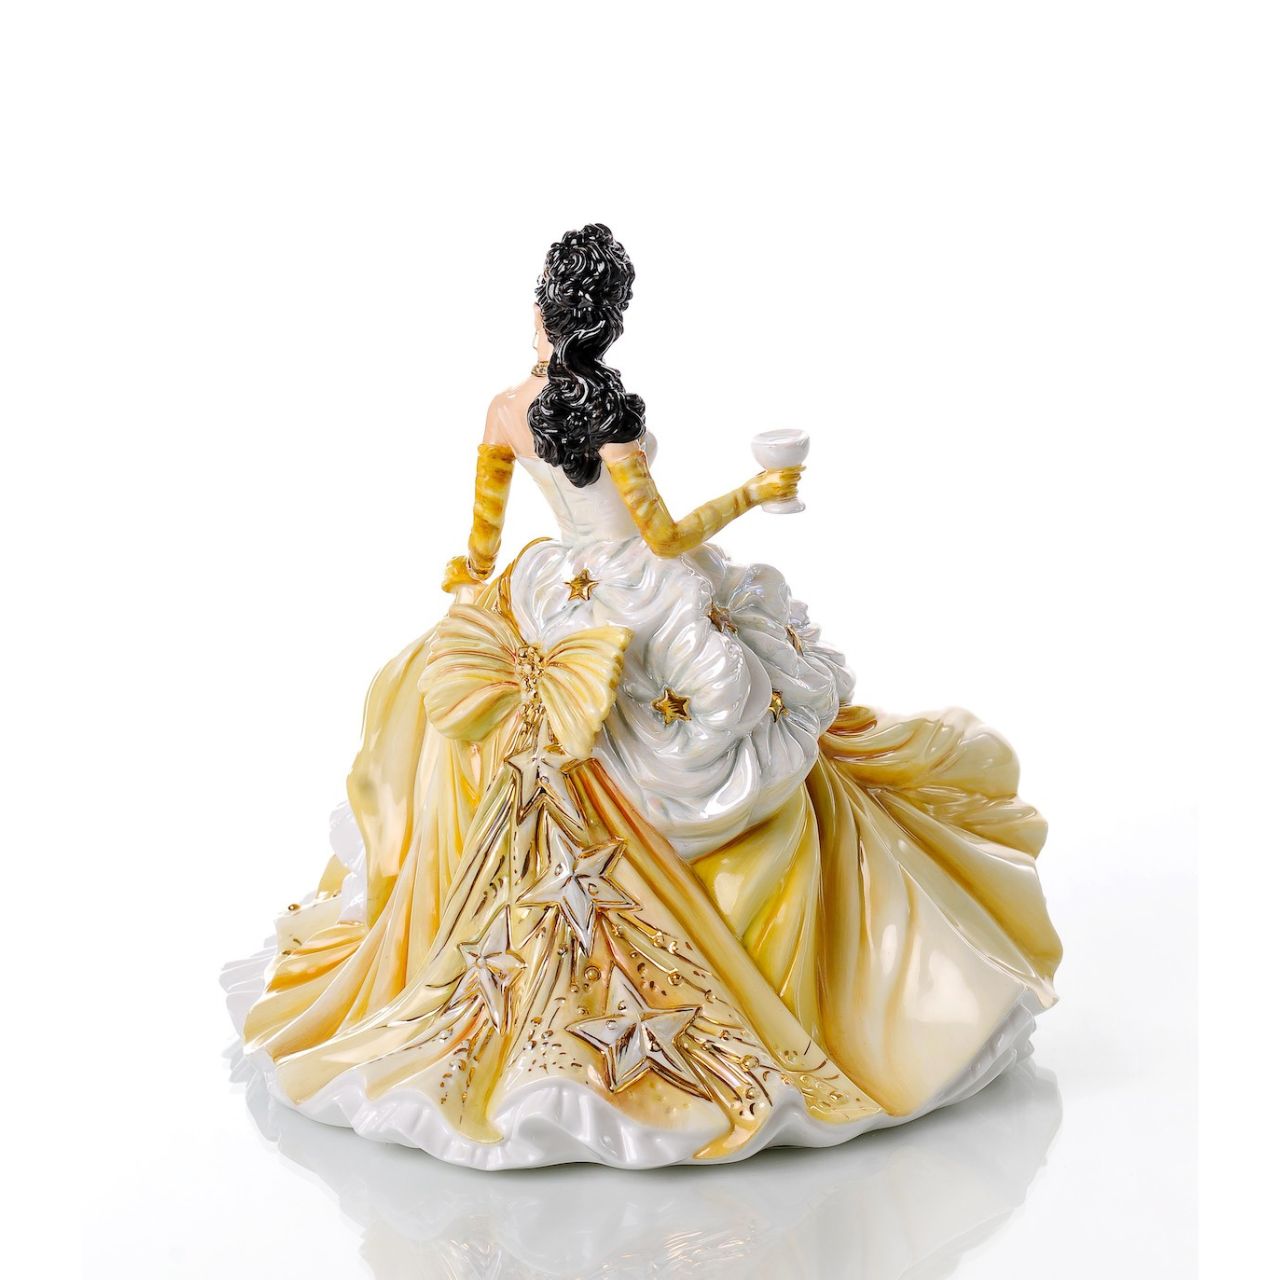 English Ladies Congratulations Gold  Our Congratulations Gold figurine is one of our best sellers from the English Ladies Congratulations Collection. This is an amazing fine bone china figurine, designed by renowned modeller Valerie Annand and Master Painter Dan Smith, for our Congratulations figurines range.